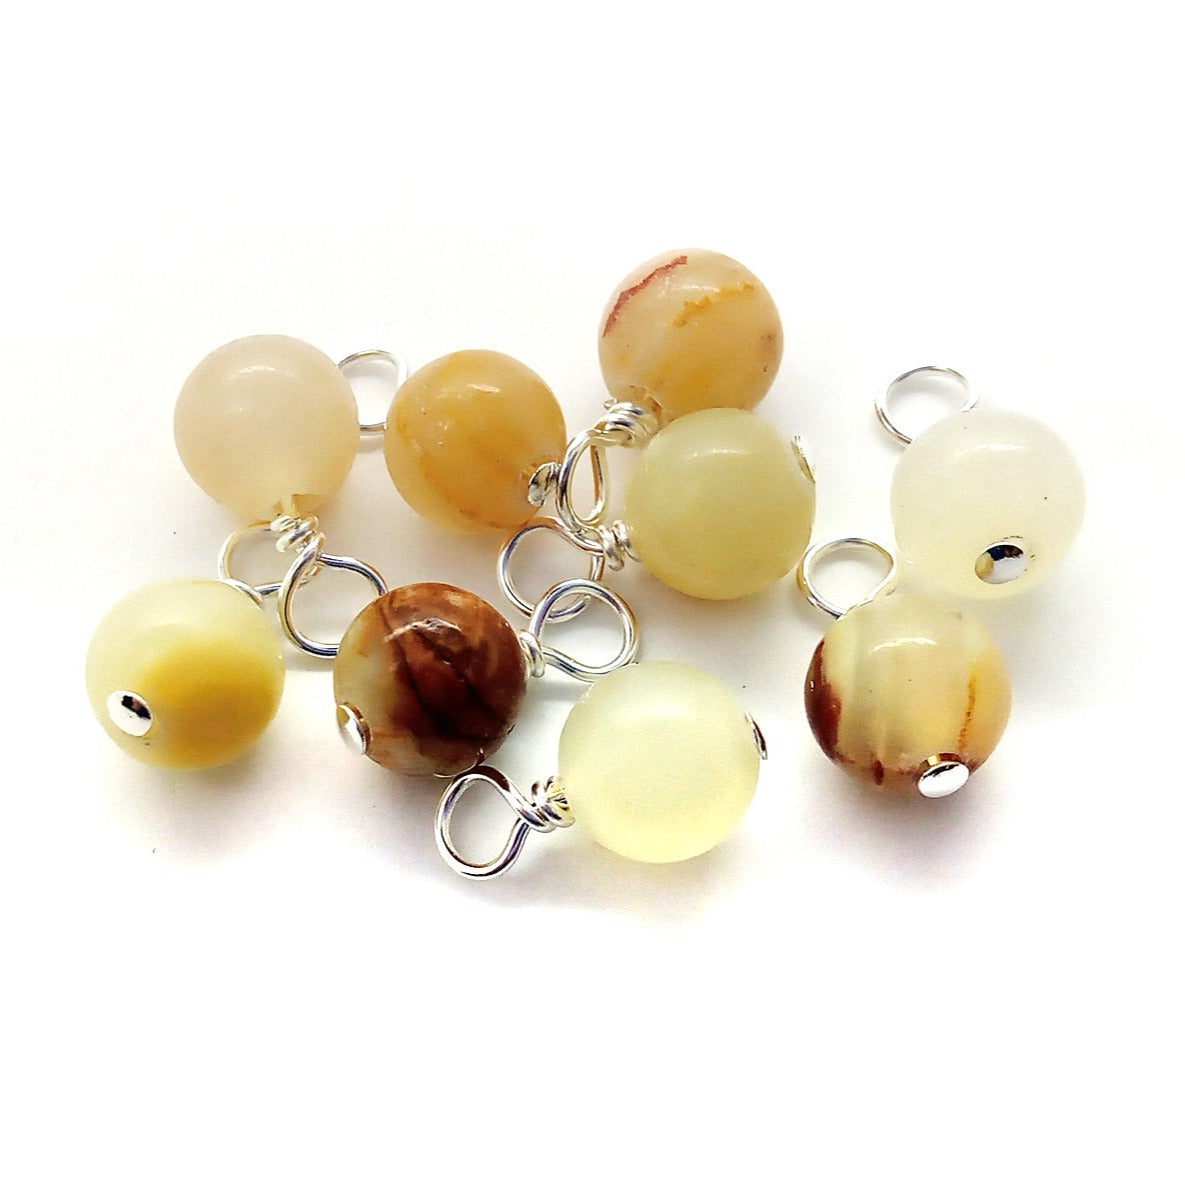 Yellow-brown calcite 6mm gemstone bead dangle charms, made by Adorabilities.